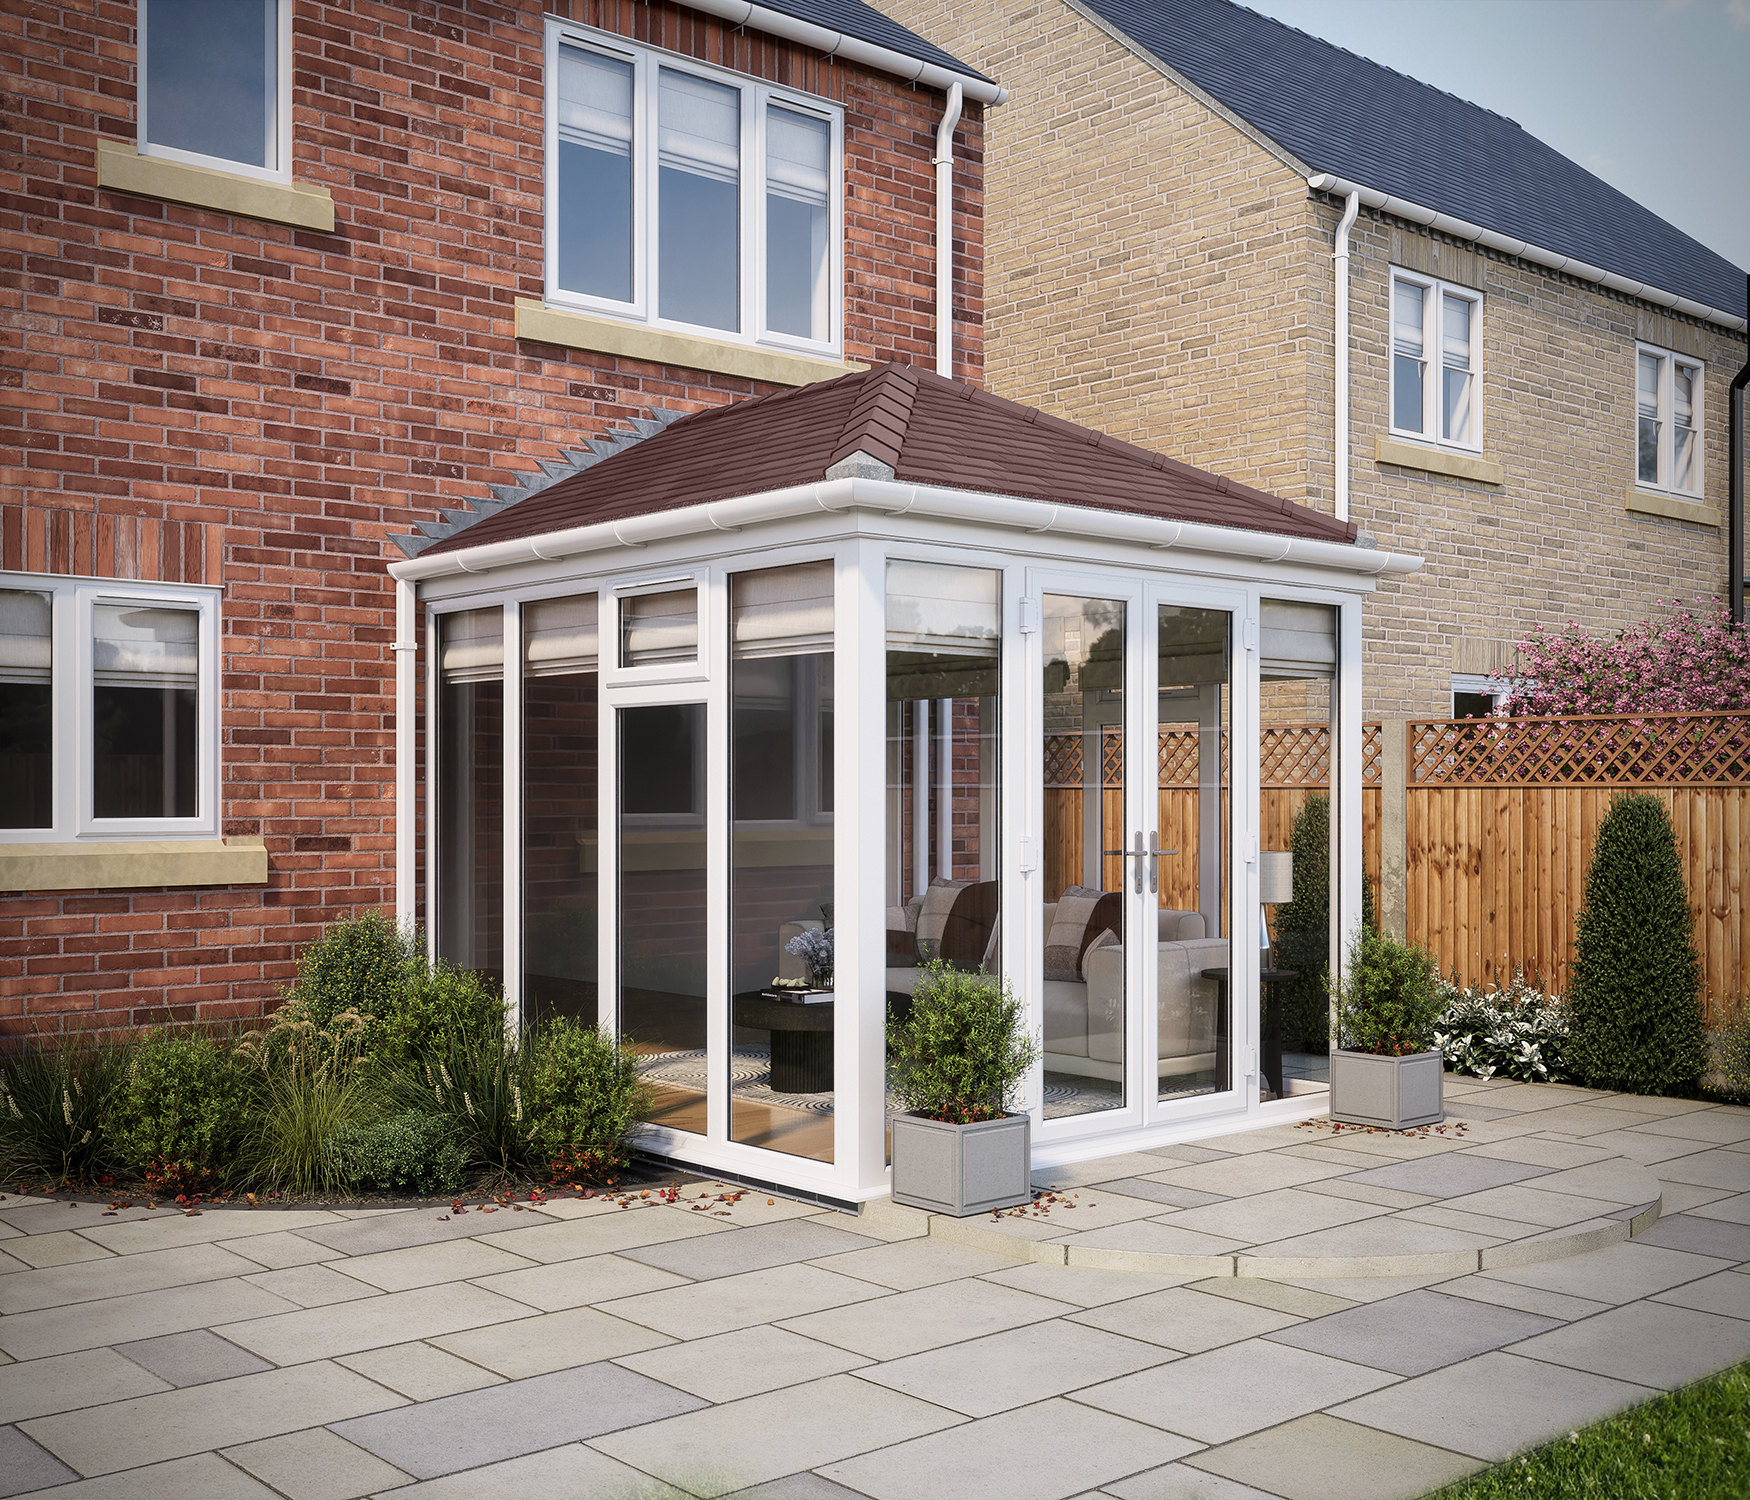 SOLid roof Full Height Edwardian Conservatory White Frames with Rustic Brown Tiles